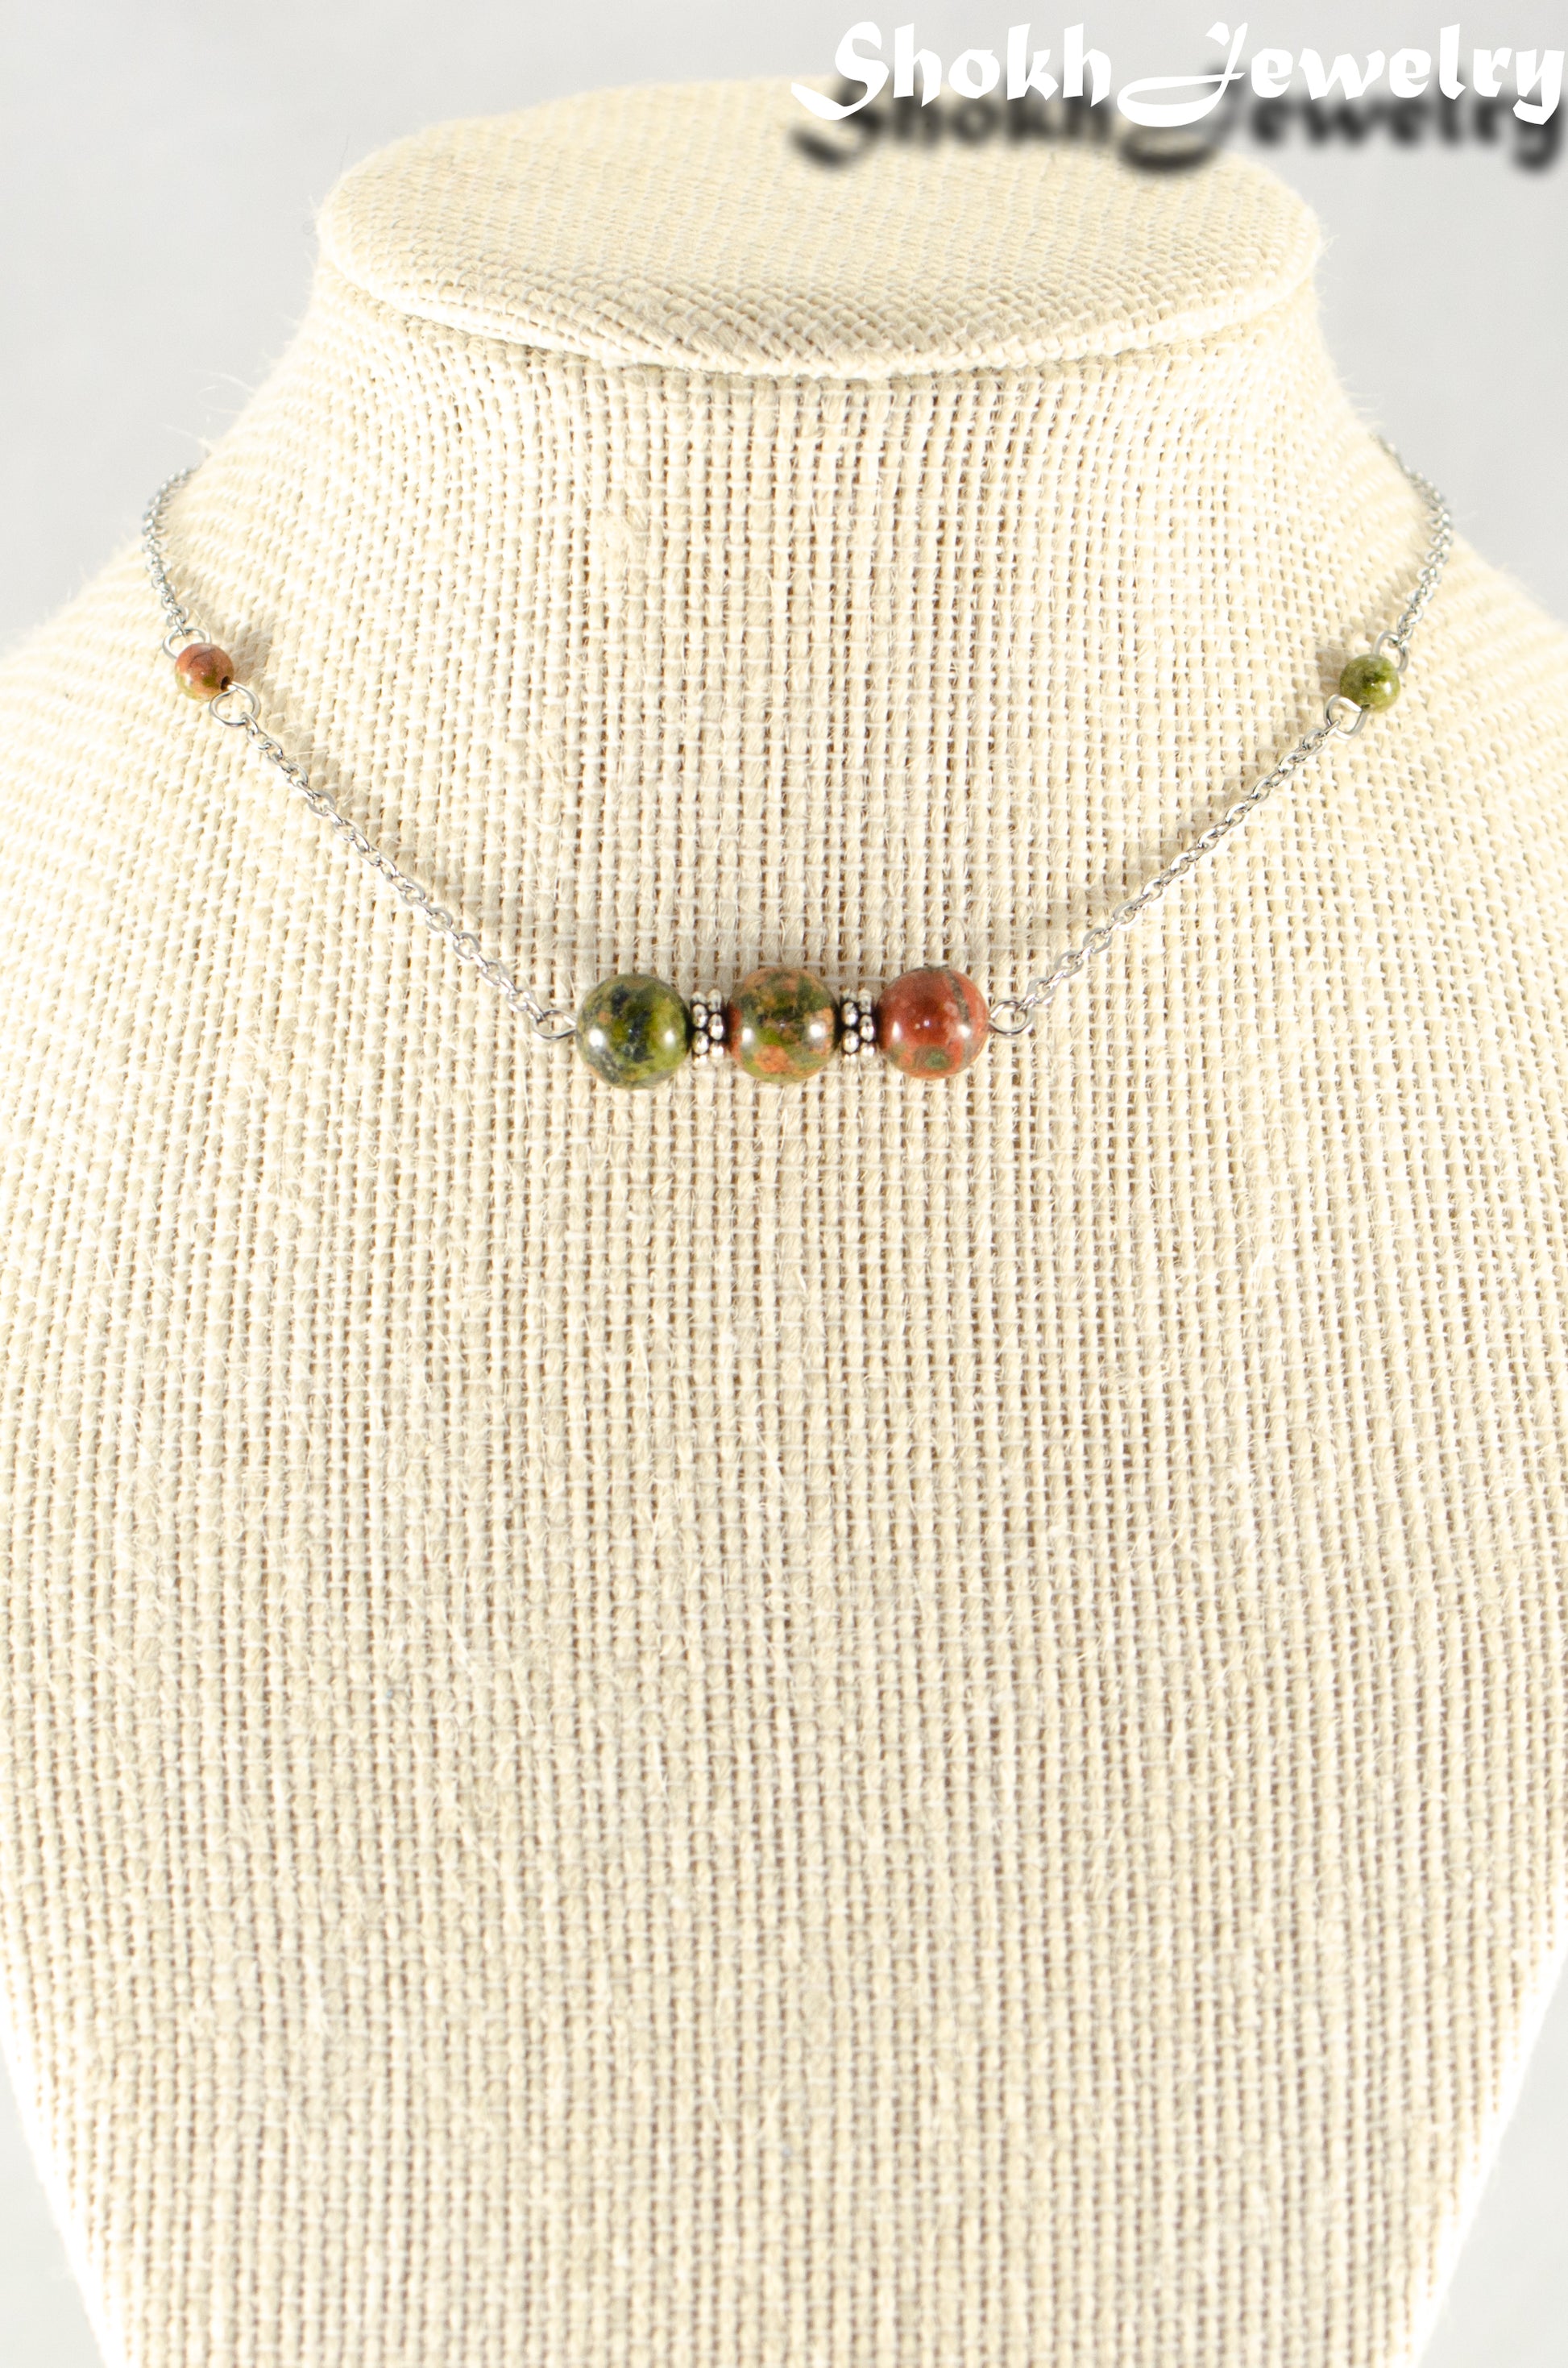 Close up of Natural Unakite Jasper and Chain Choker Necklace.